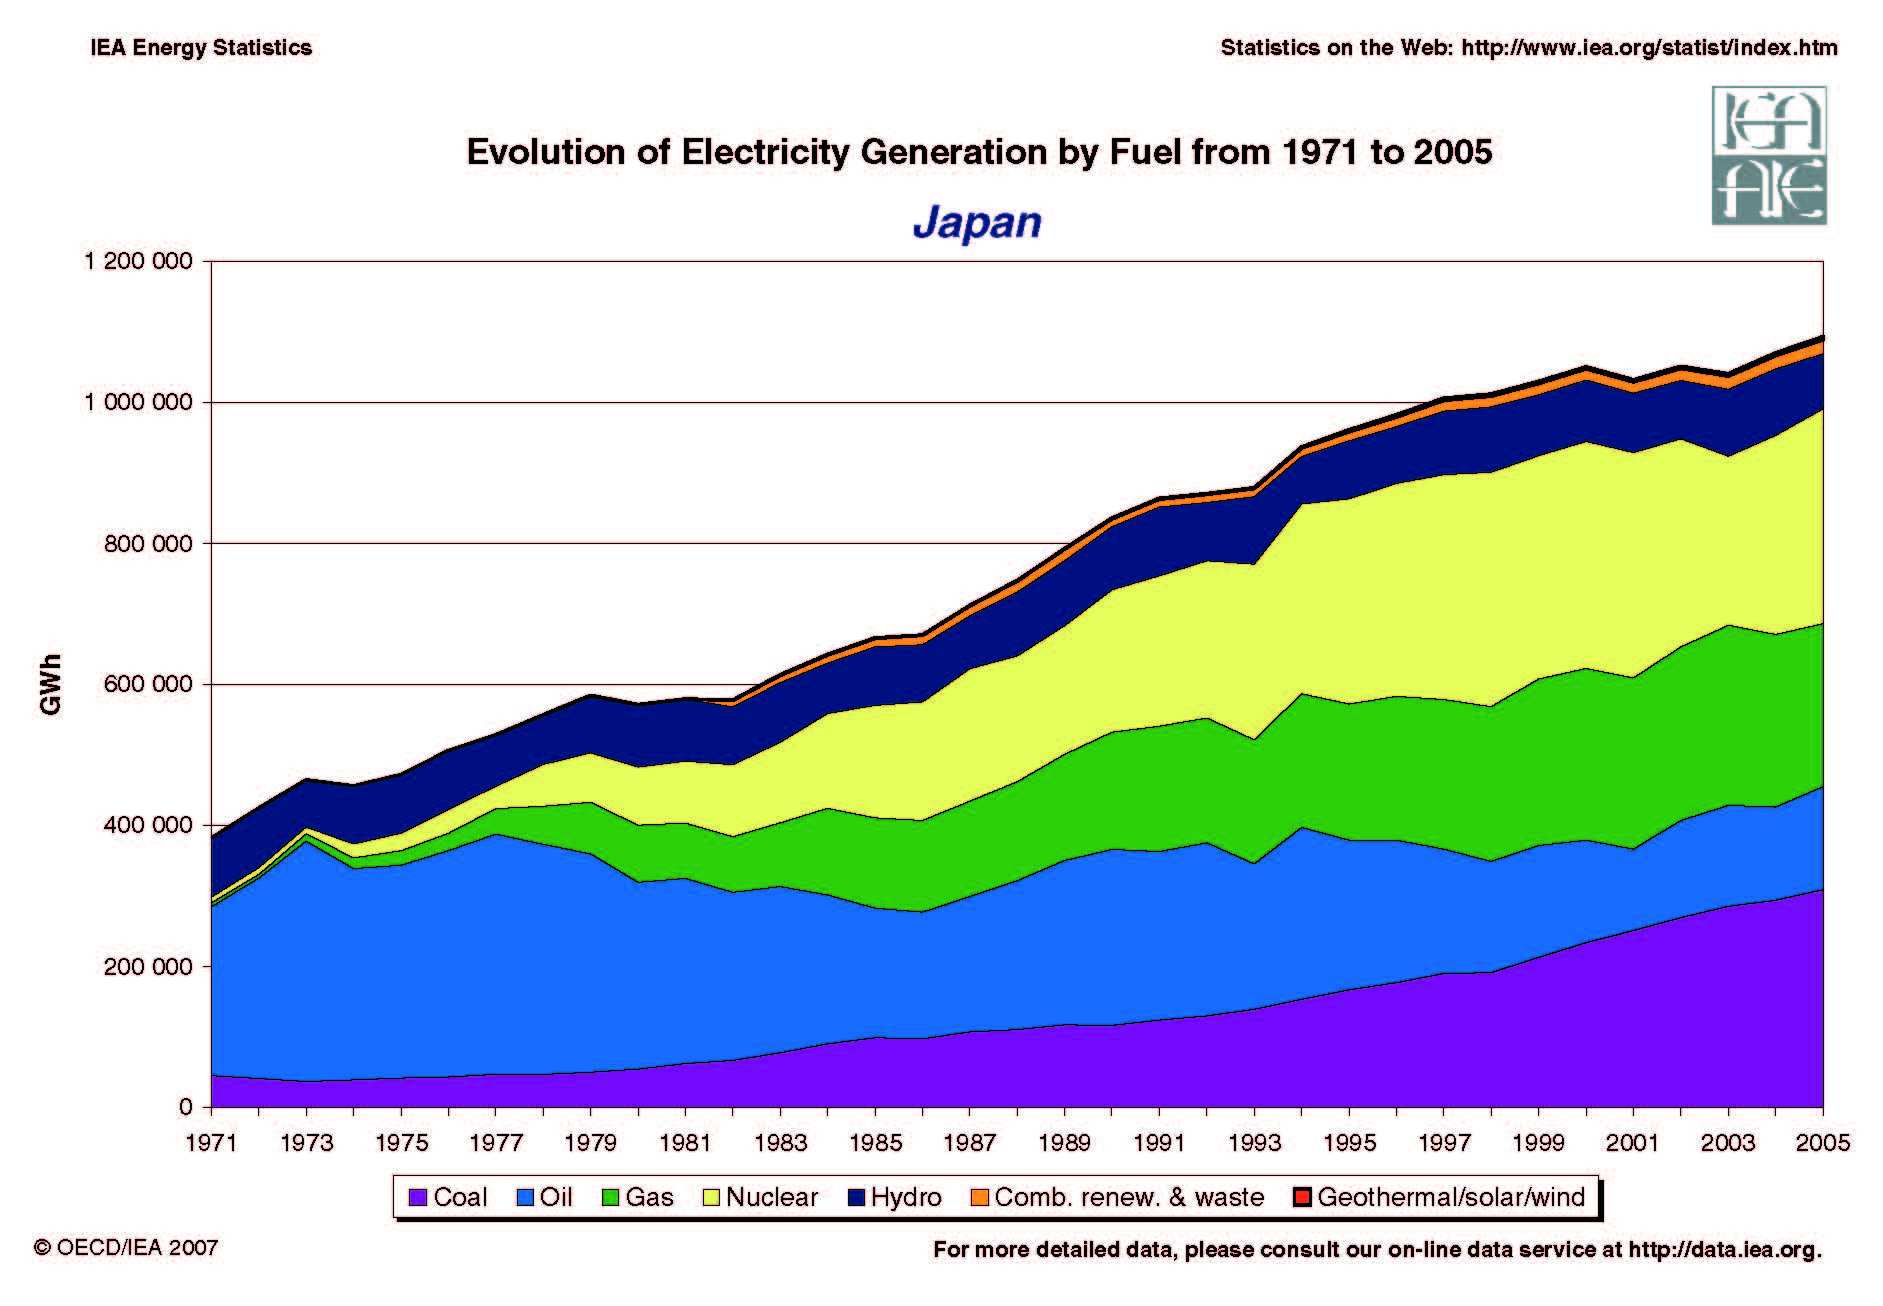 Japan Evolution of Electricity Generation by Fuel 1971 - 2005